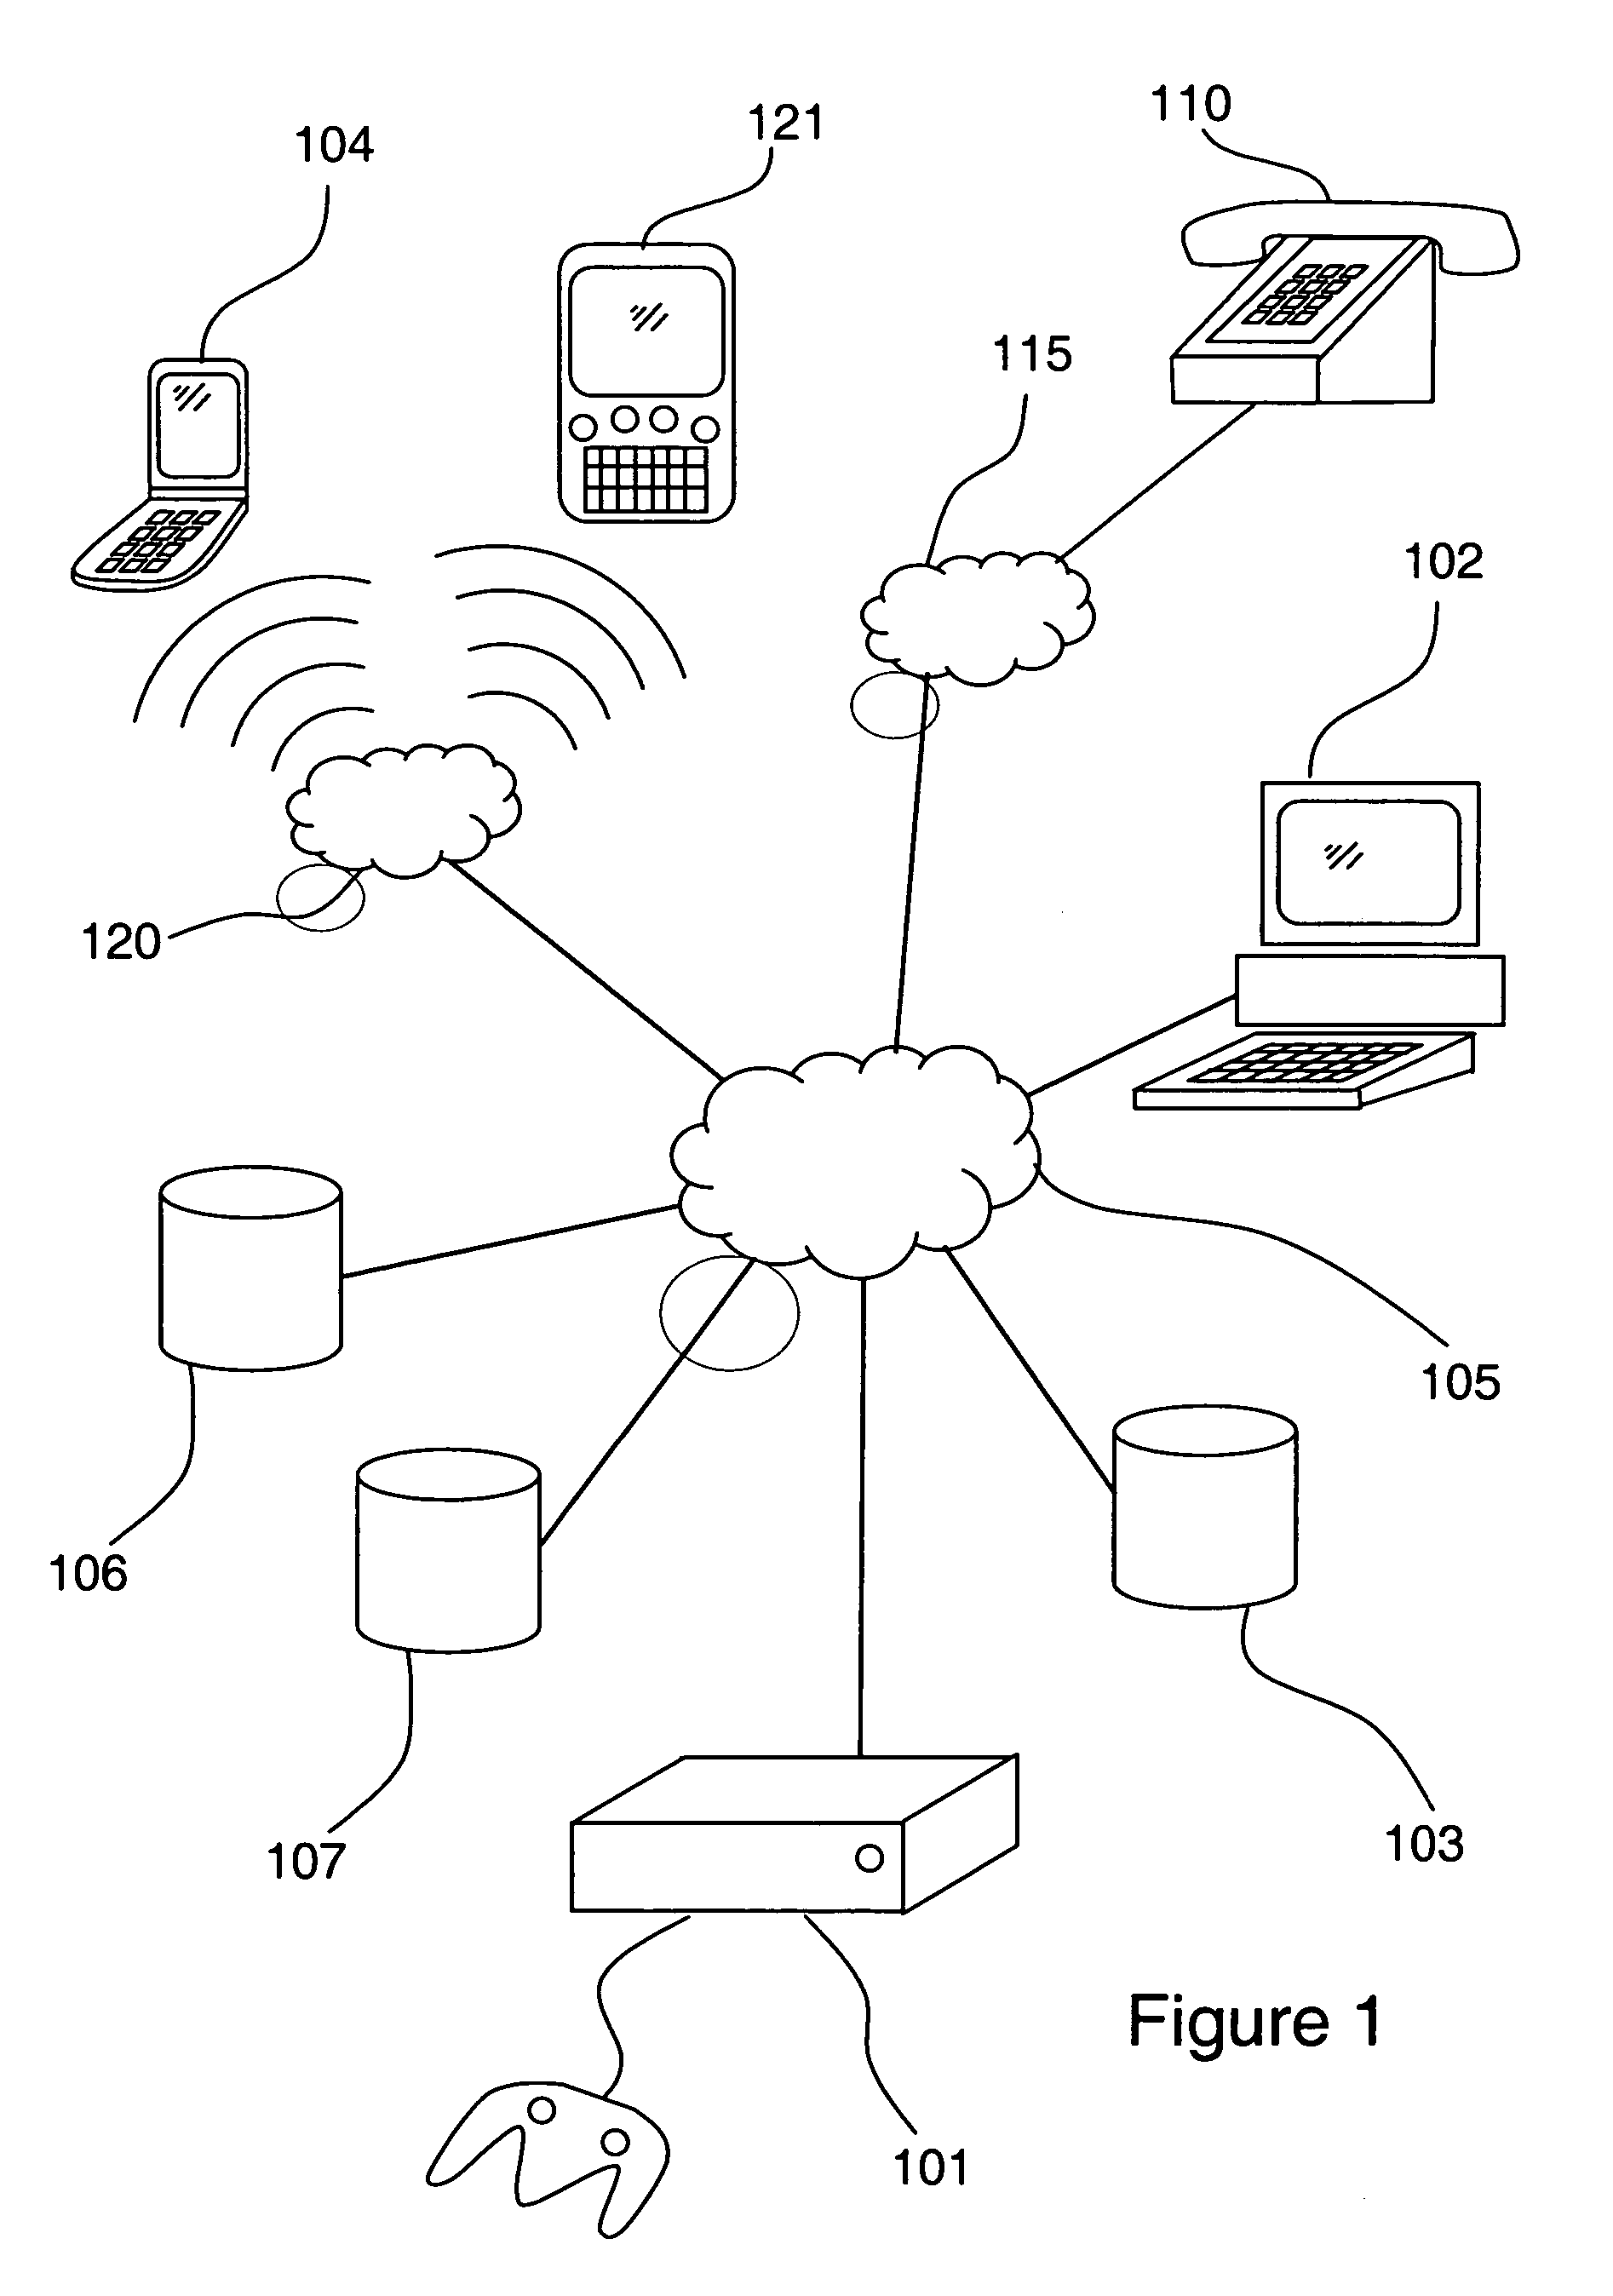 Method and system for enhancing video games and video game systems